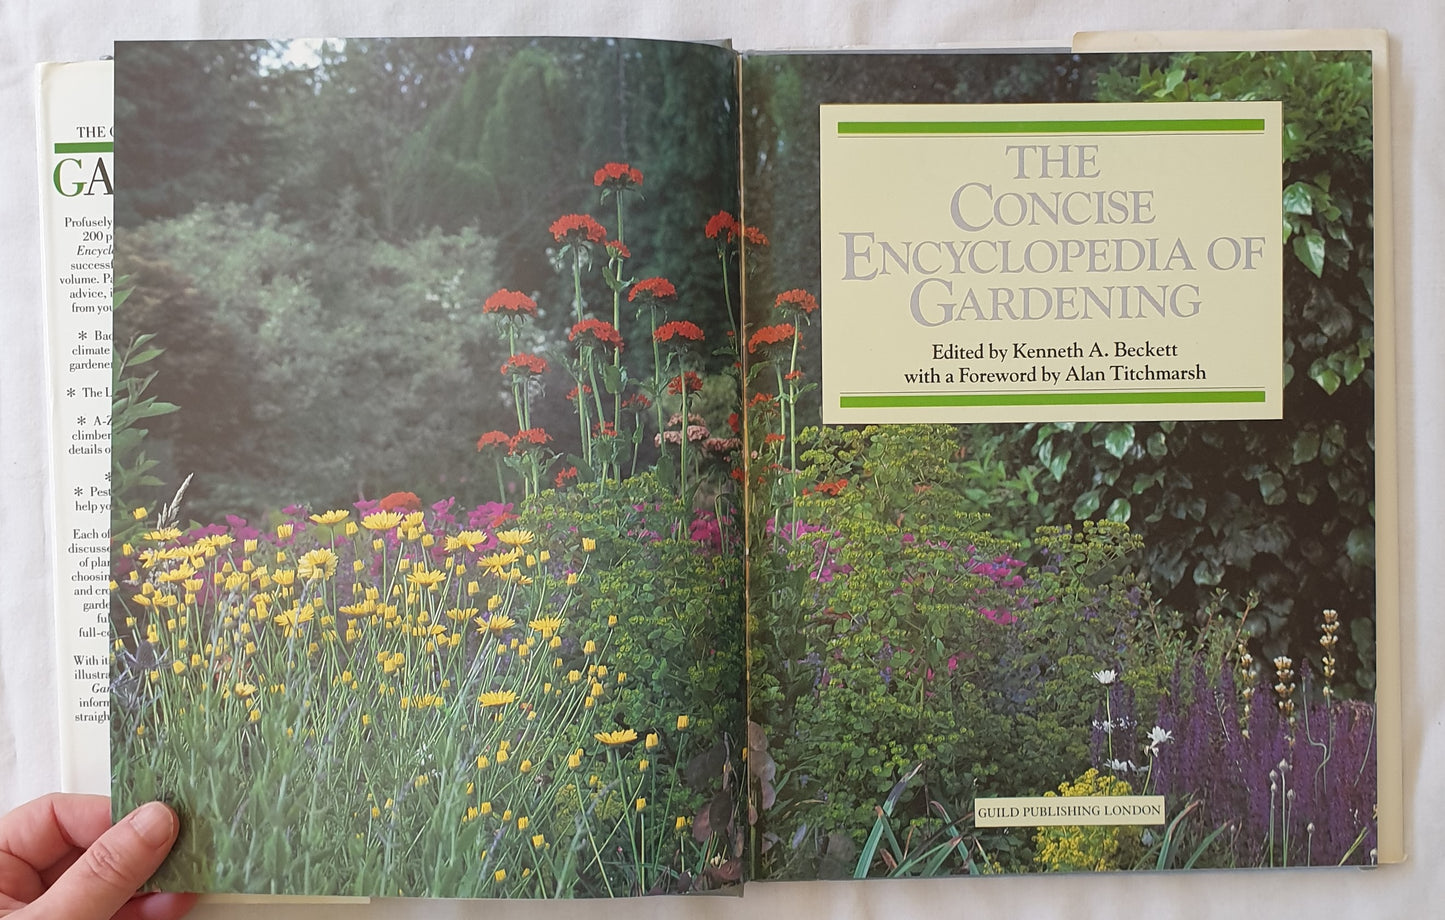 The Concise Encyclopedia of Gardening Edited by Kenneth A. Beckett